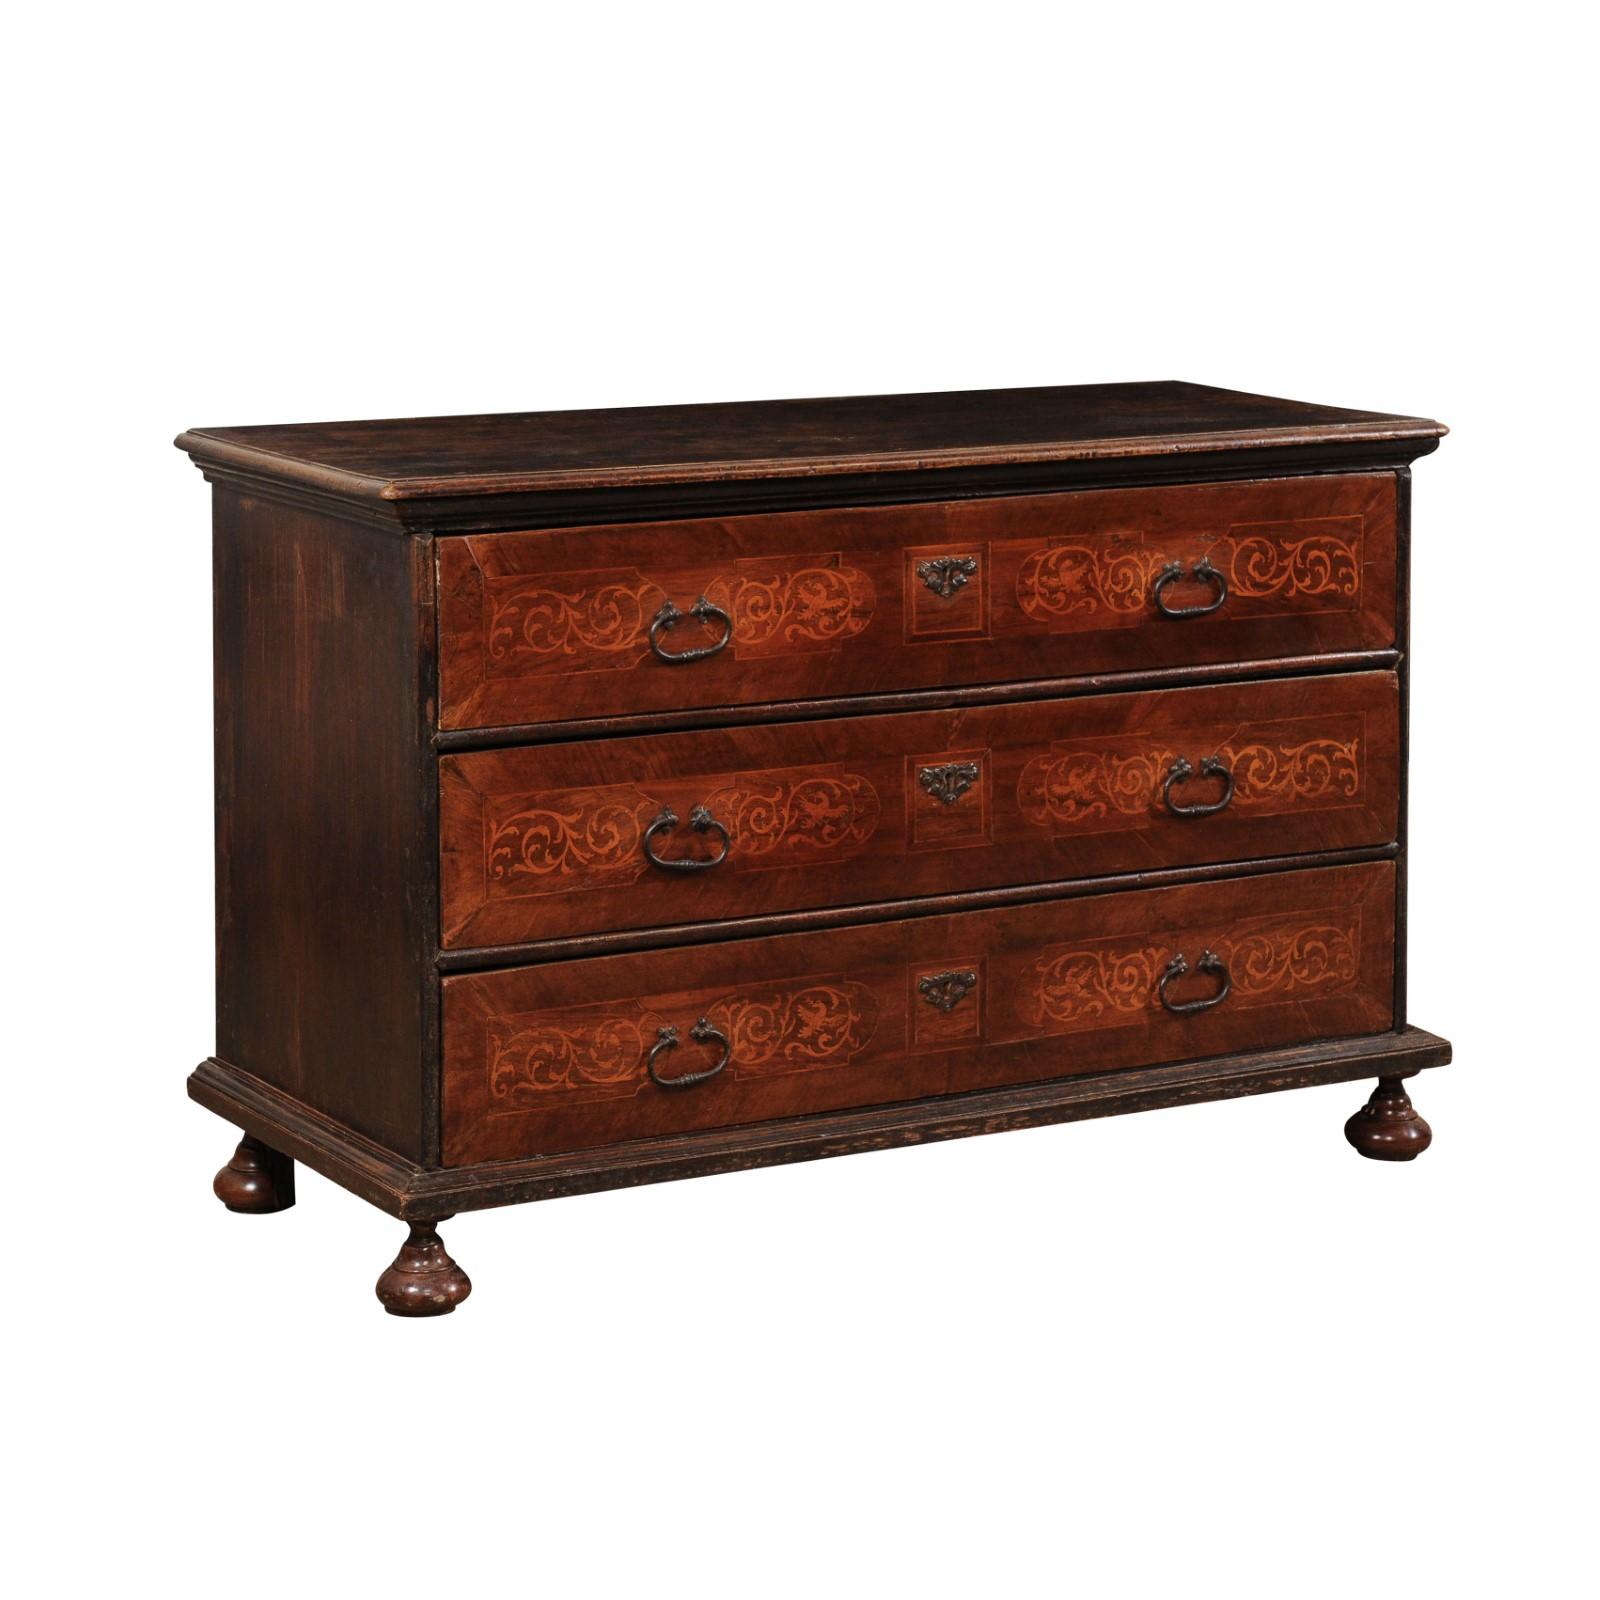 18th C. Italian Chest w/Exquisite Inlay Designs and the Original Hardware For Sale